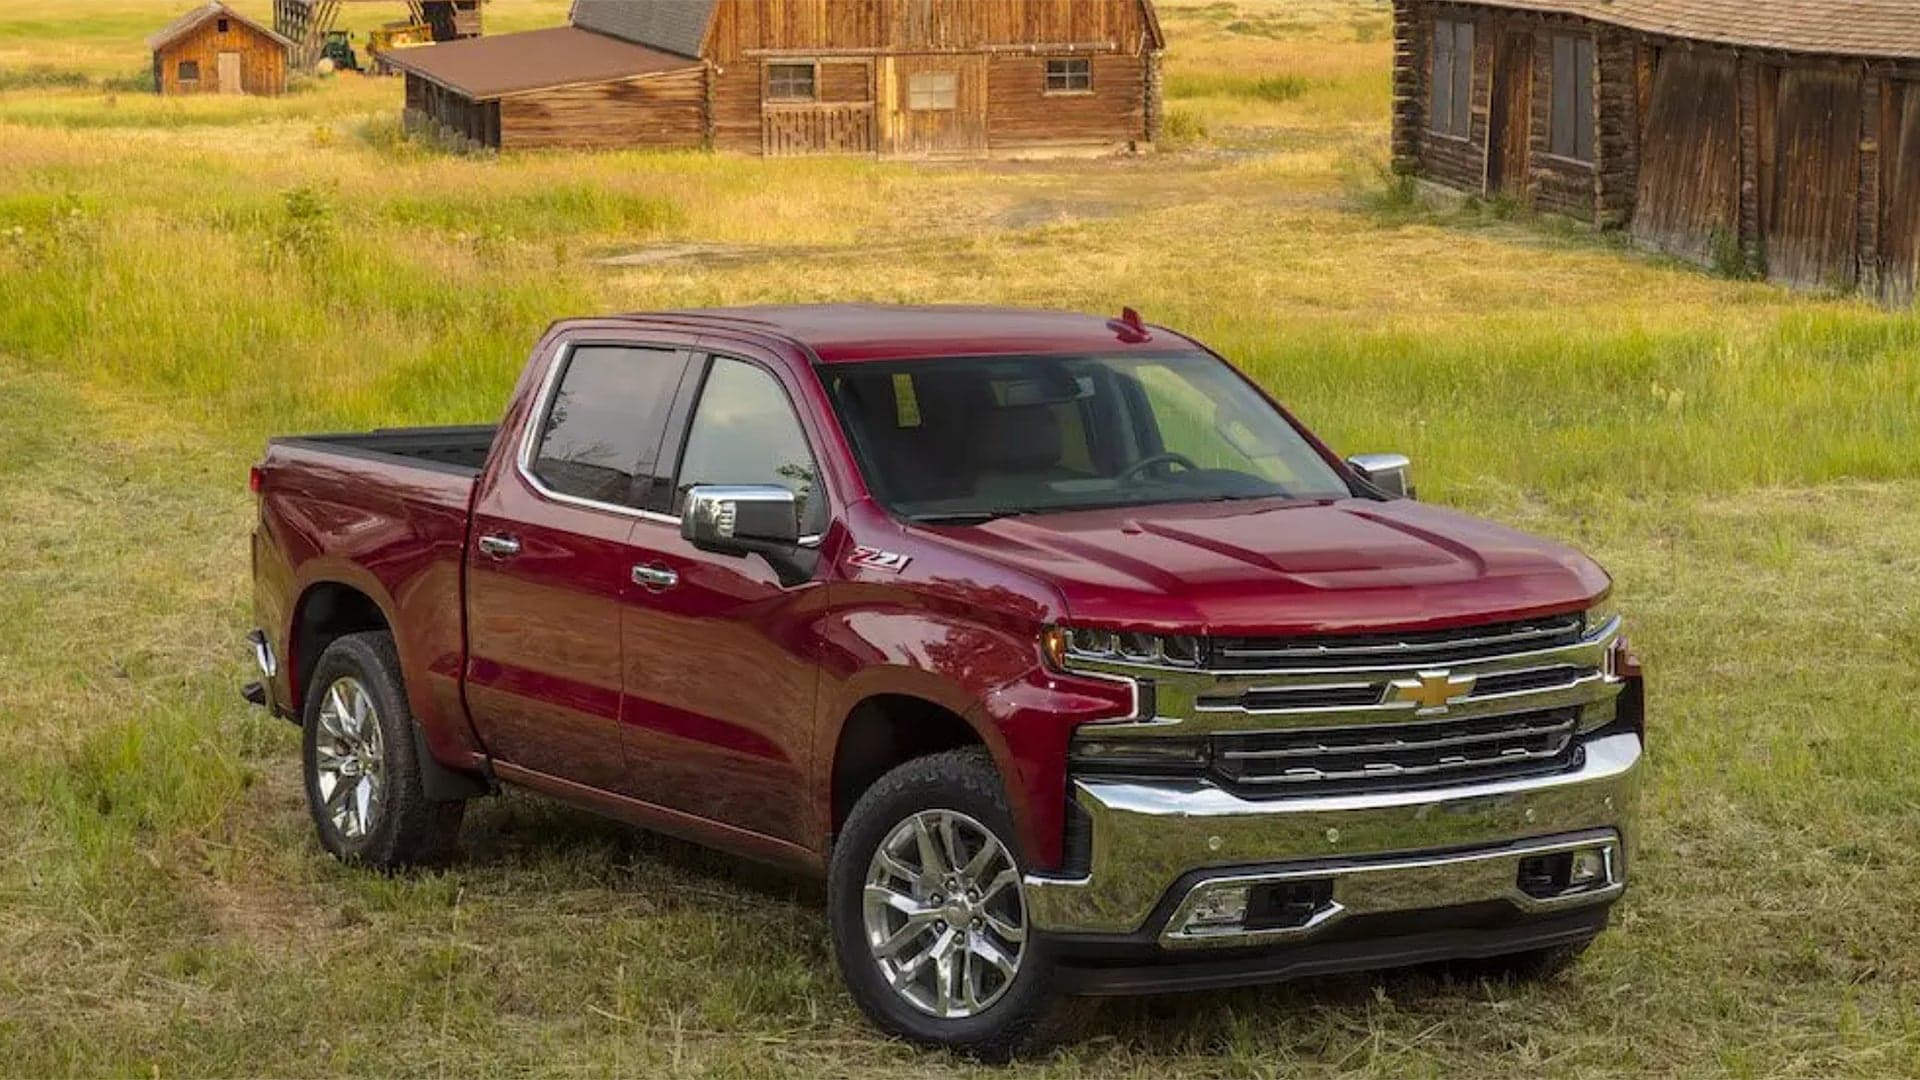 2019 Chevrolet Silverado Review: GM’s Flagship Pickup Proves an All-Around Letdown